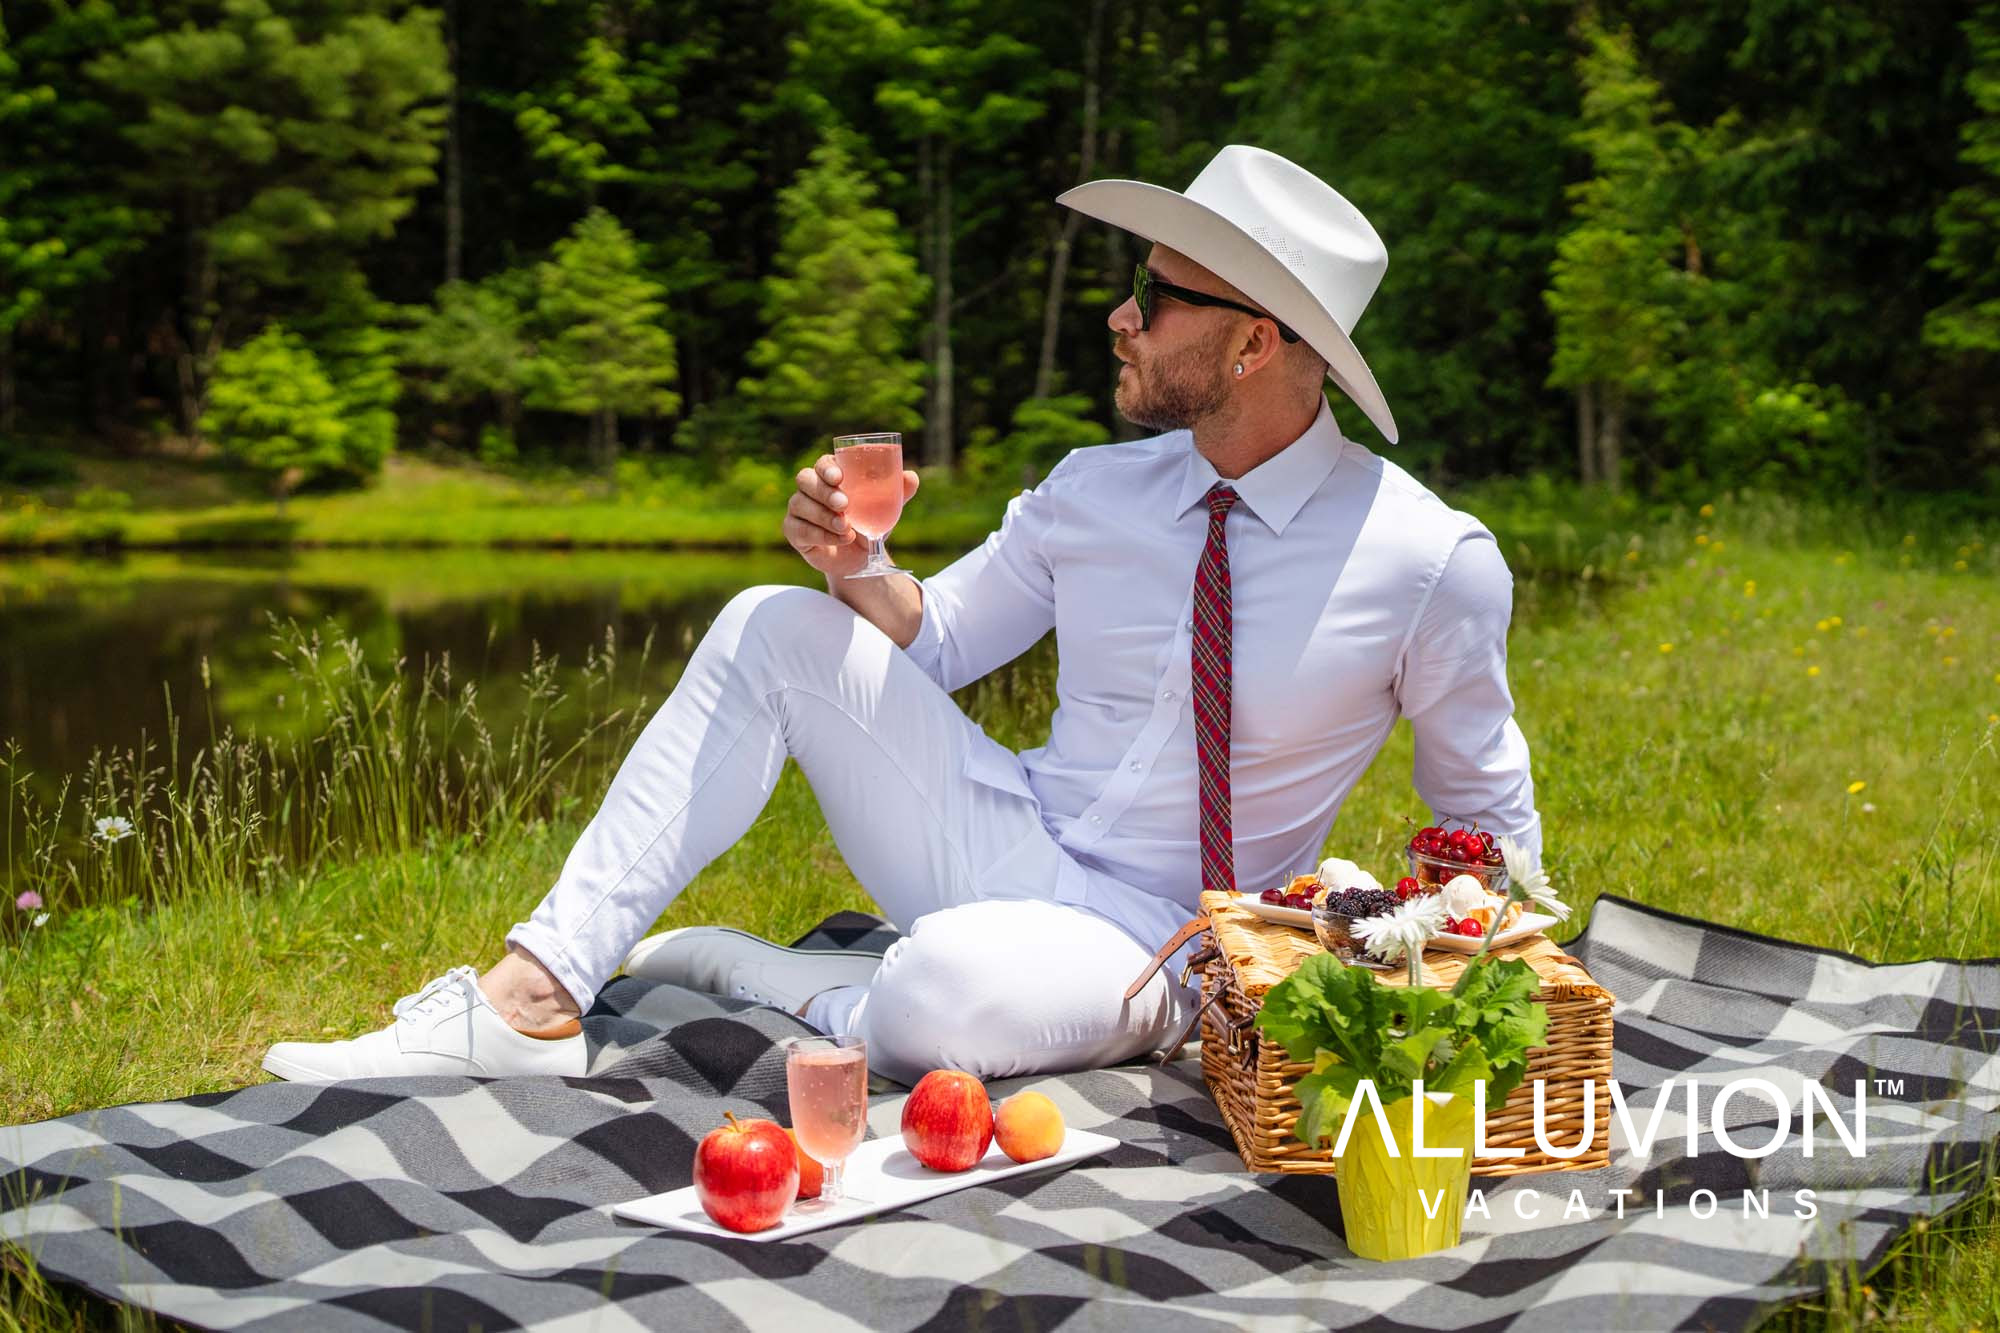 Discover LGBTQ+ Travel Getaways with Alluvion Vacations this Pride Season